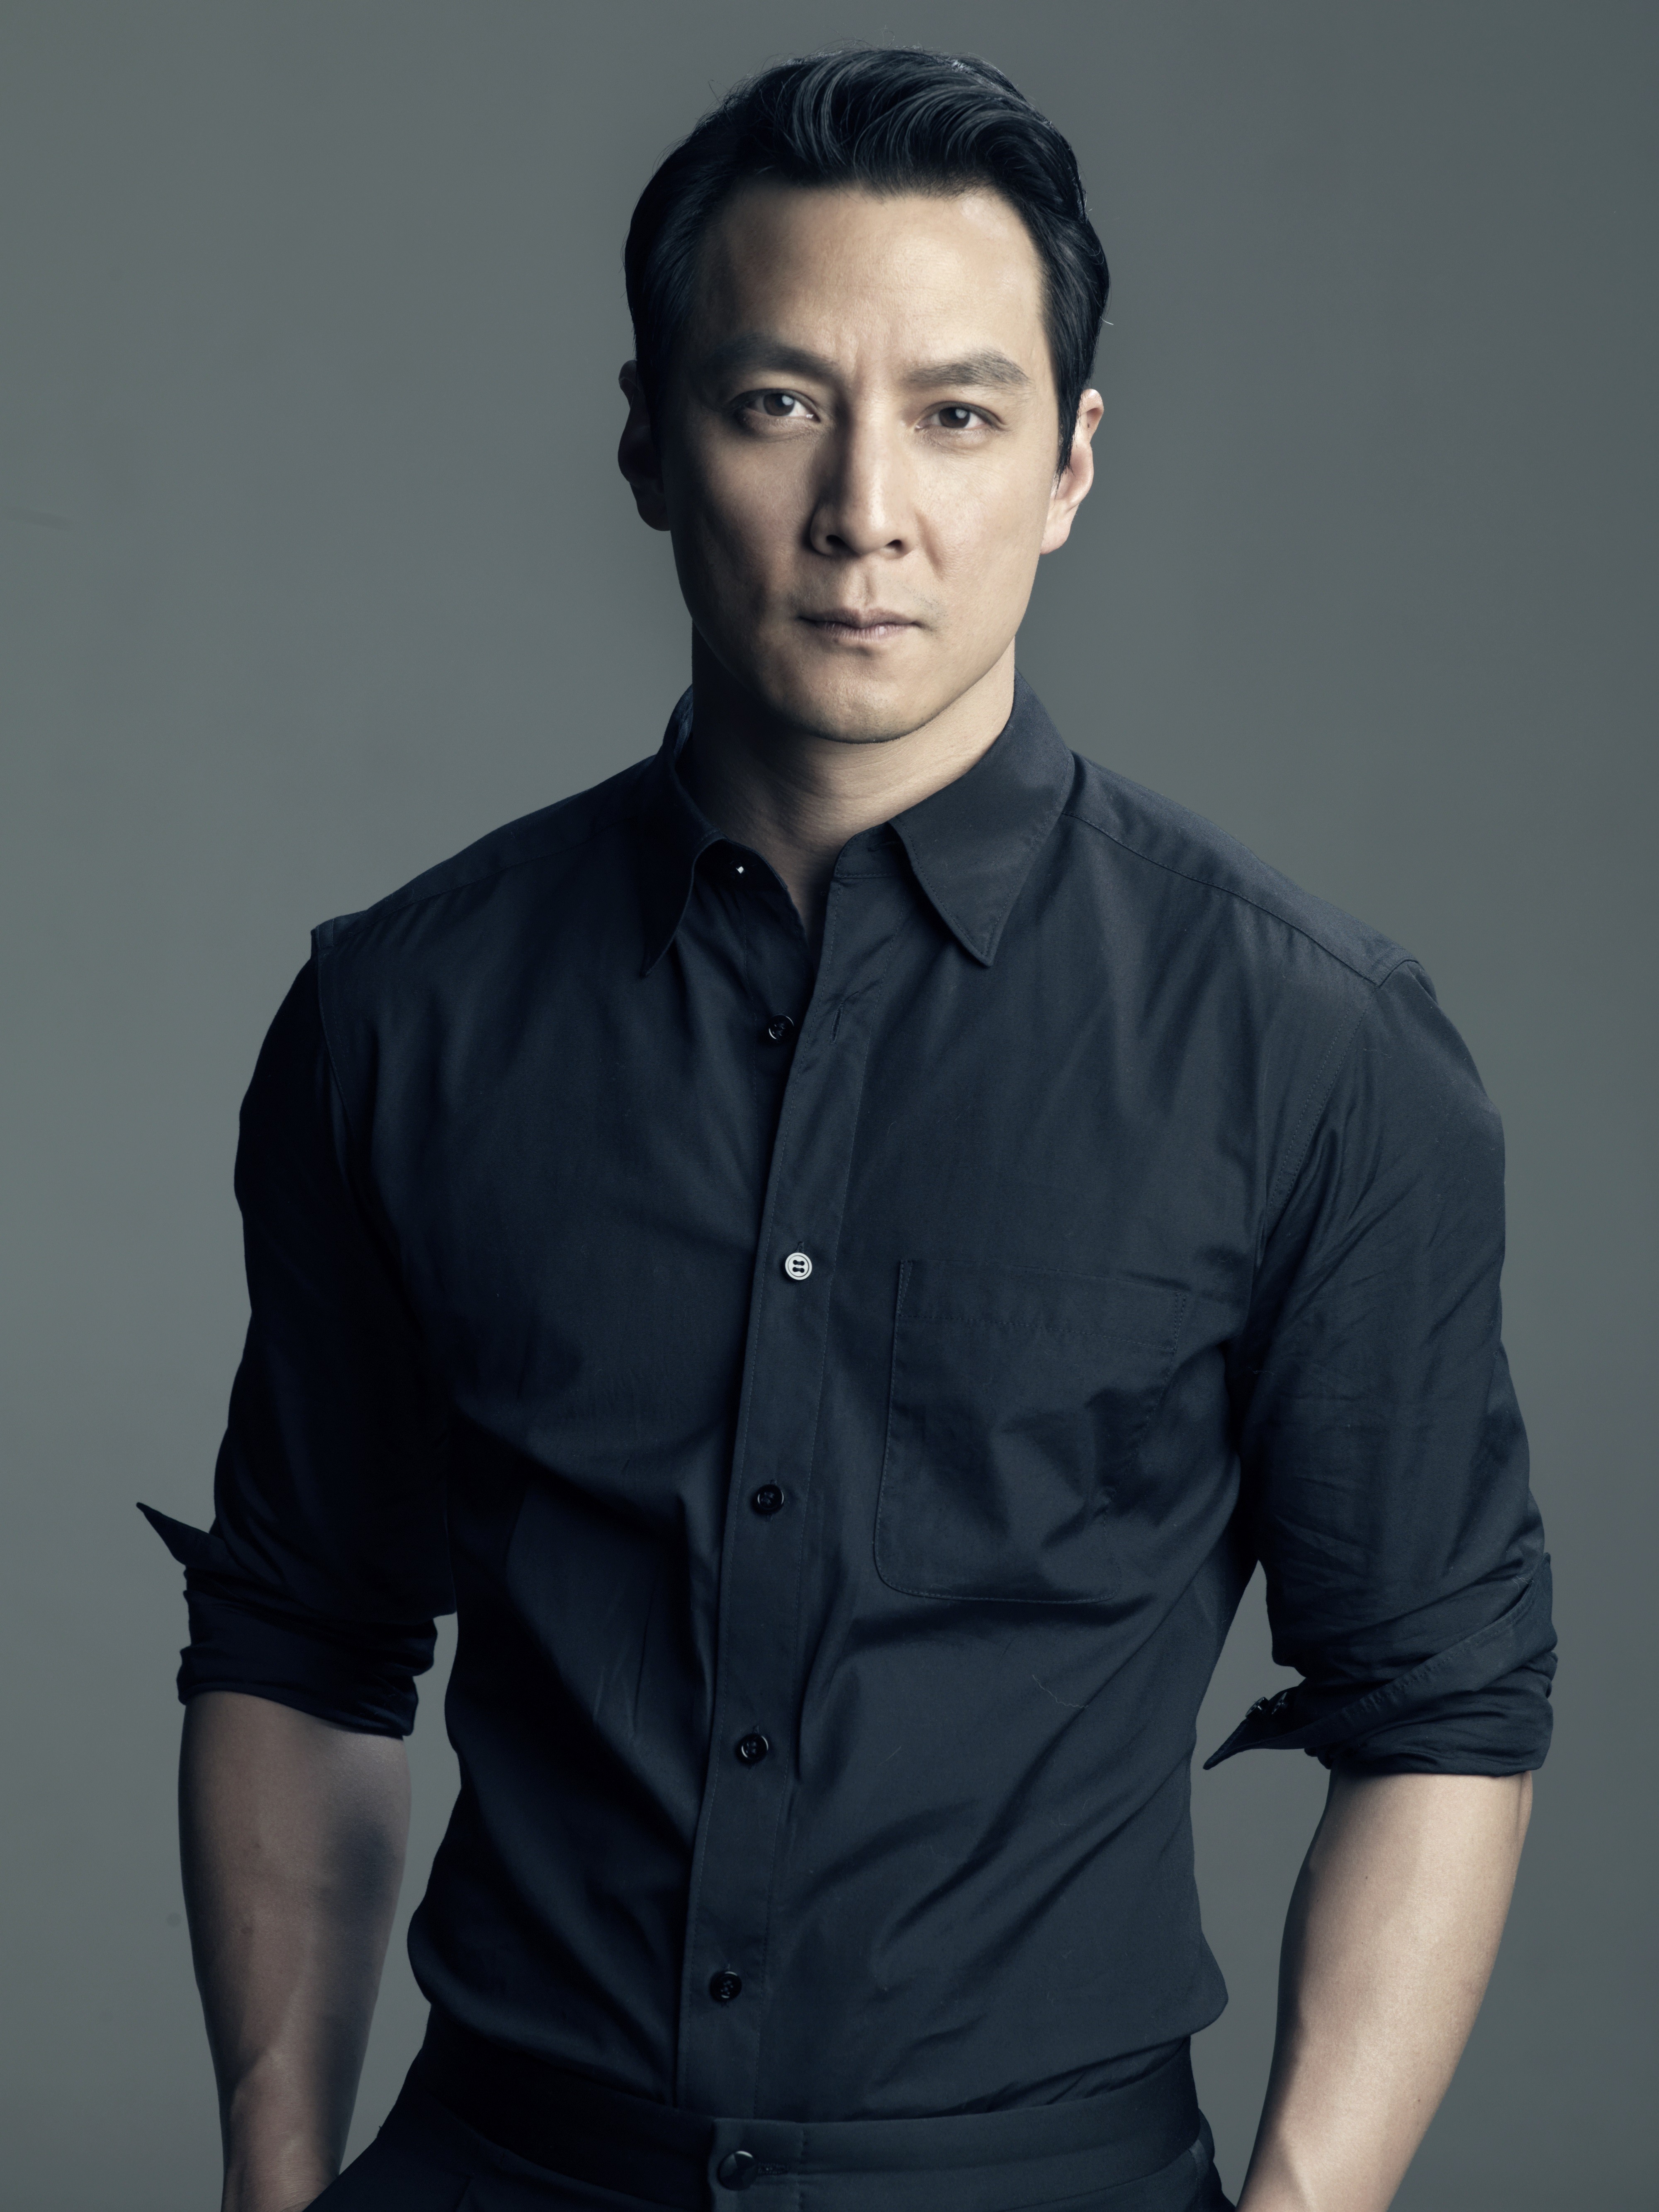 Daniel Wu is one of the members of Breitling’s Cinema Squad.